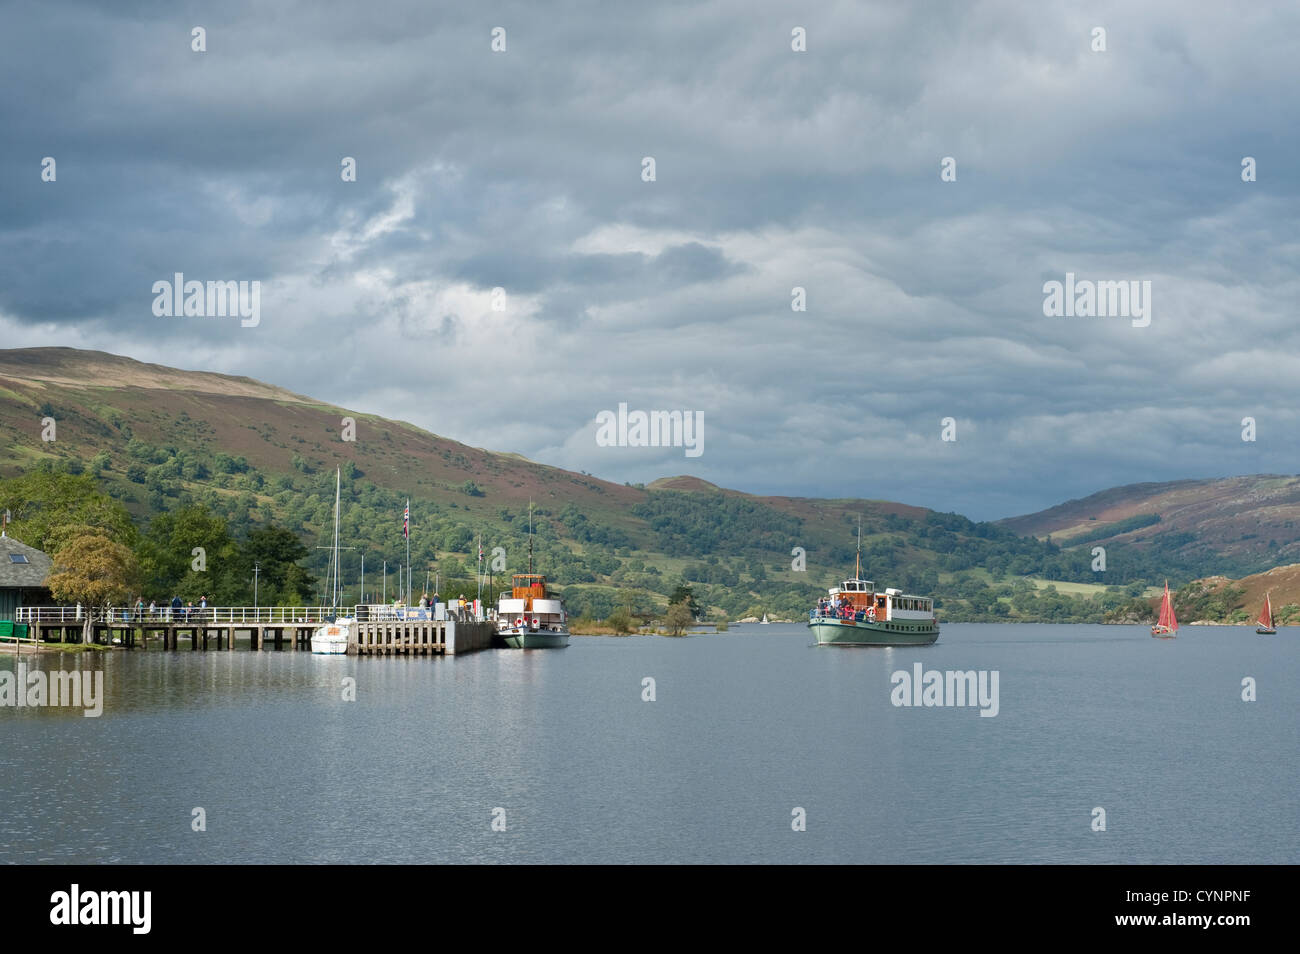 Passenger steam boat arriving at Glenridding pier on Lake Ullswater in the English Lake District Stock Photo